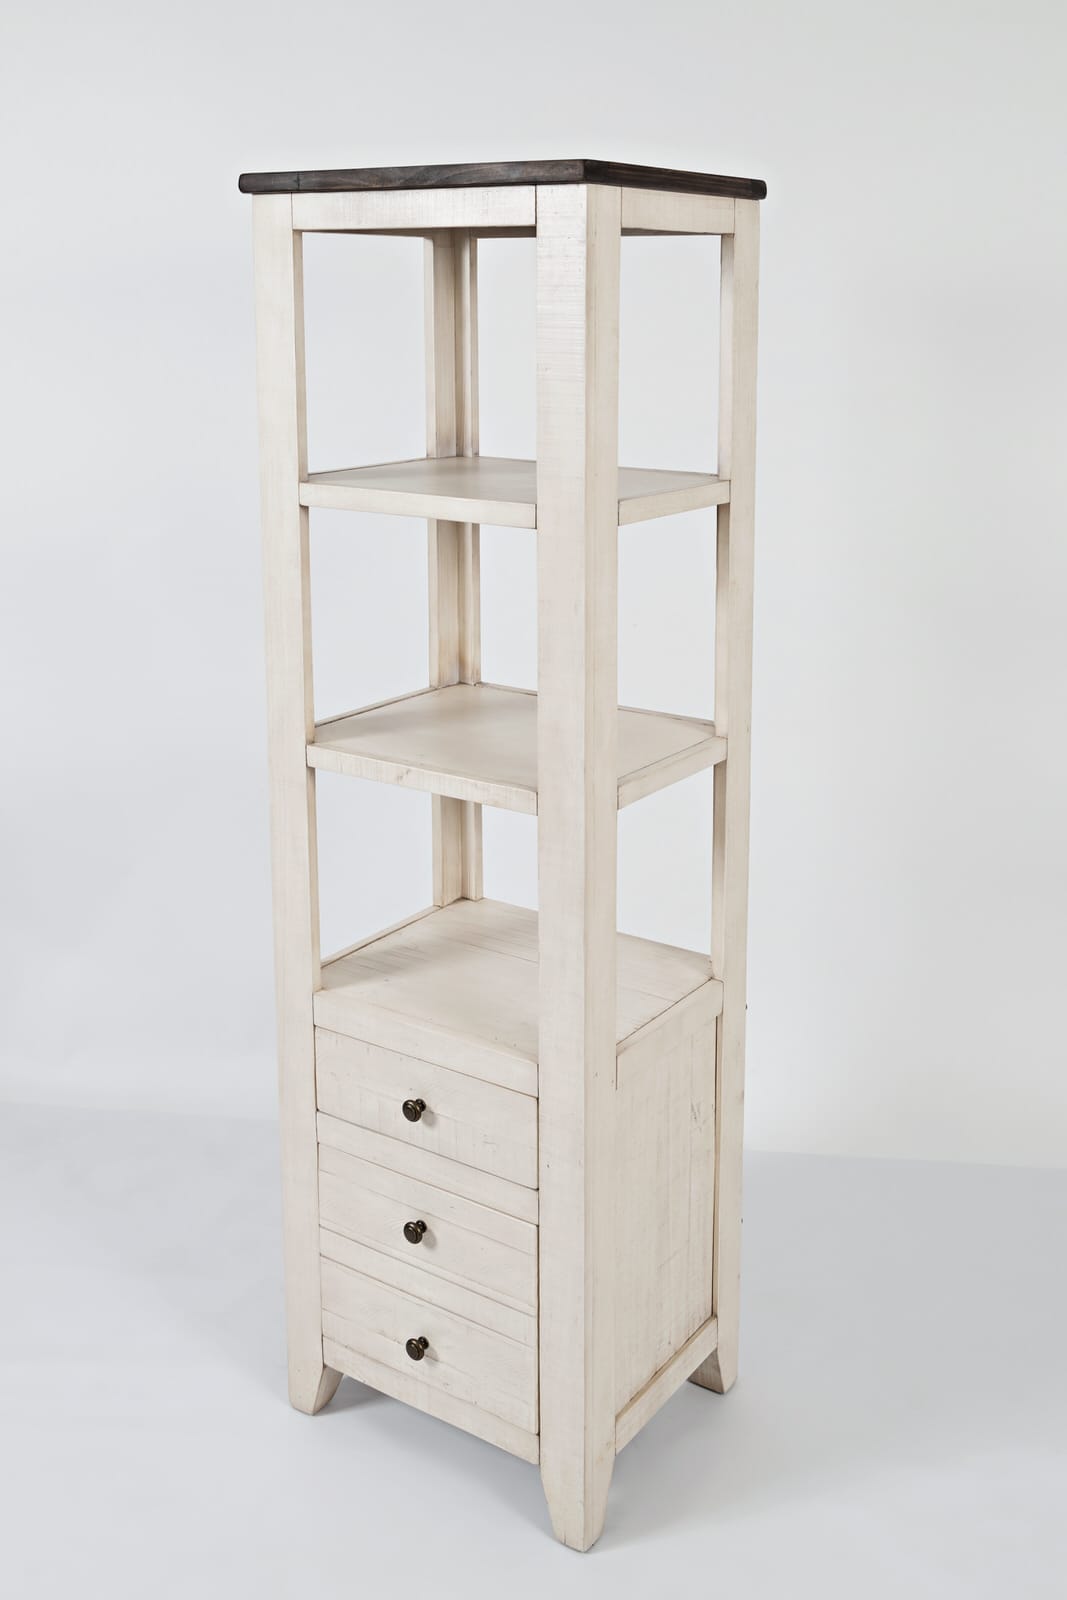 Modern 22 Inch Wide Bookcase for Large Space